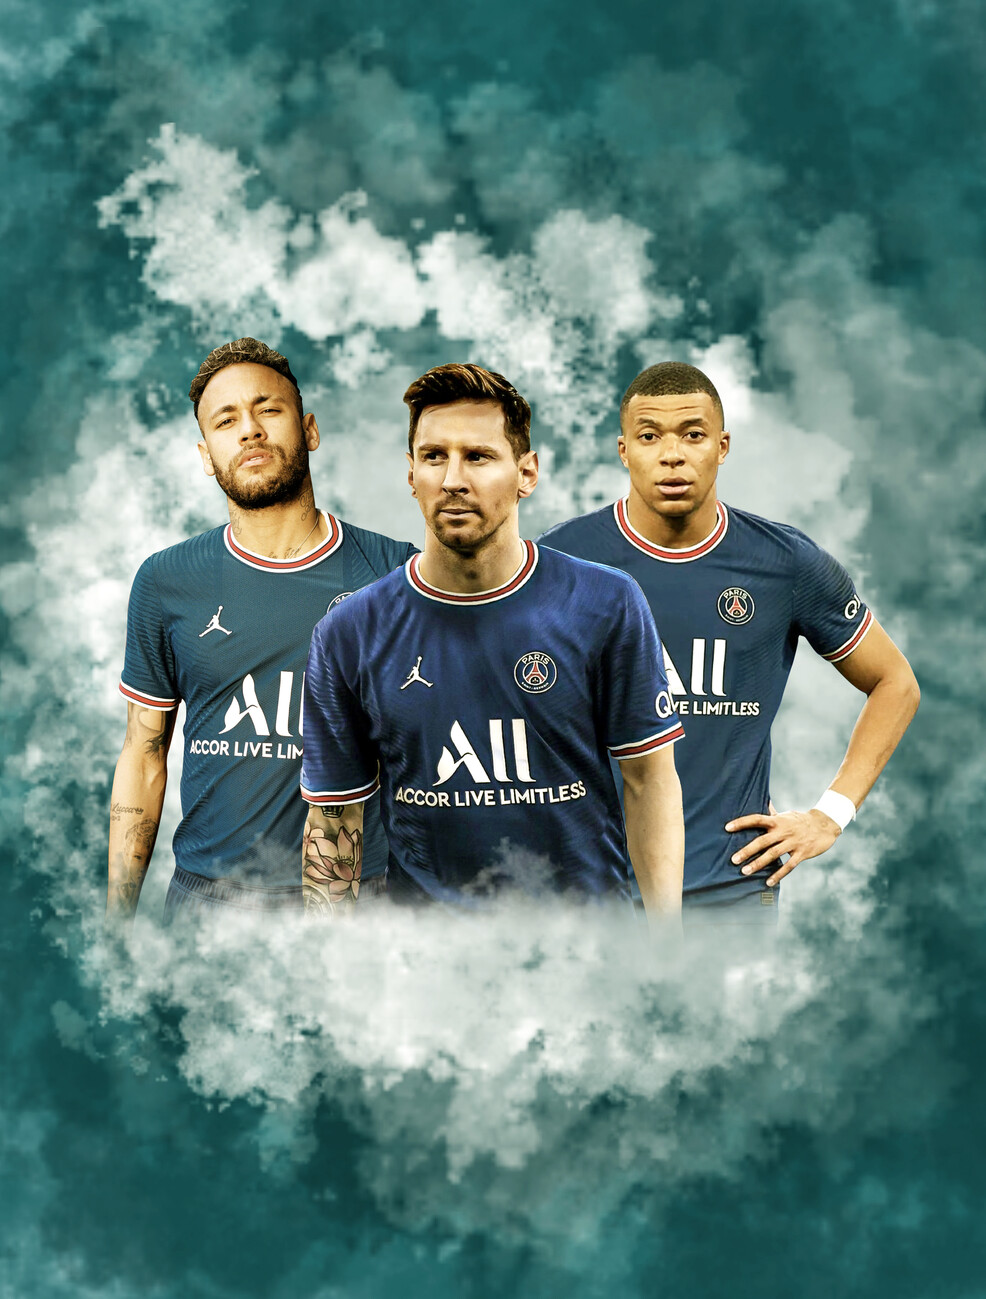 Messi x Neymar x Mbappe Wall | Buy online at Europosters